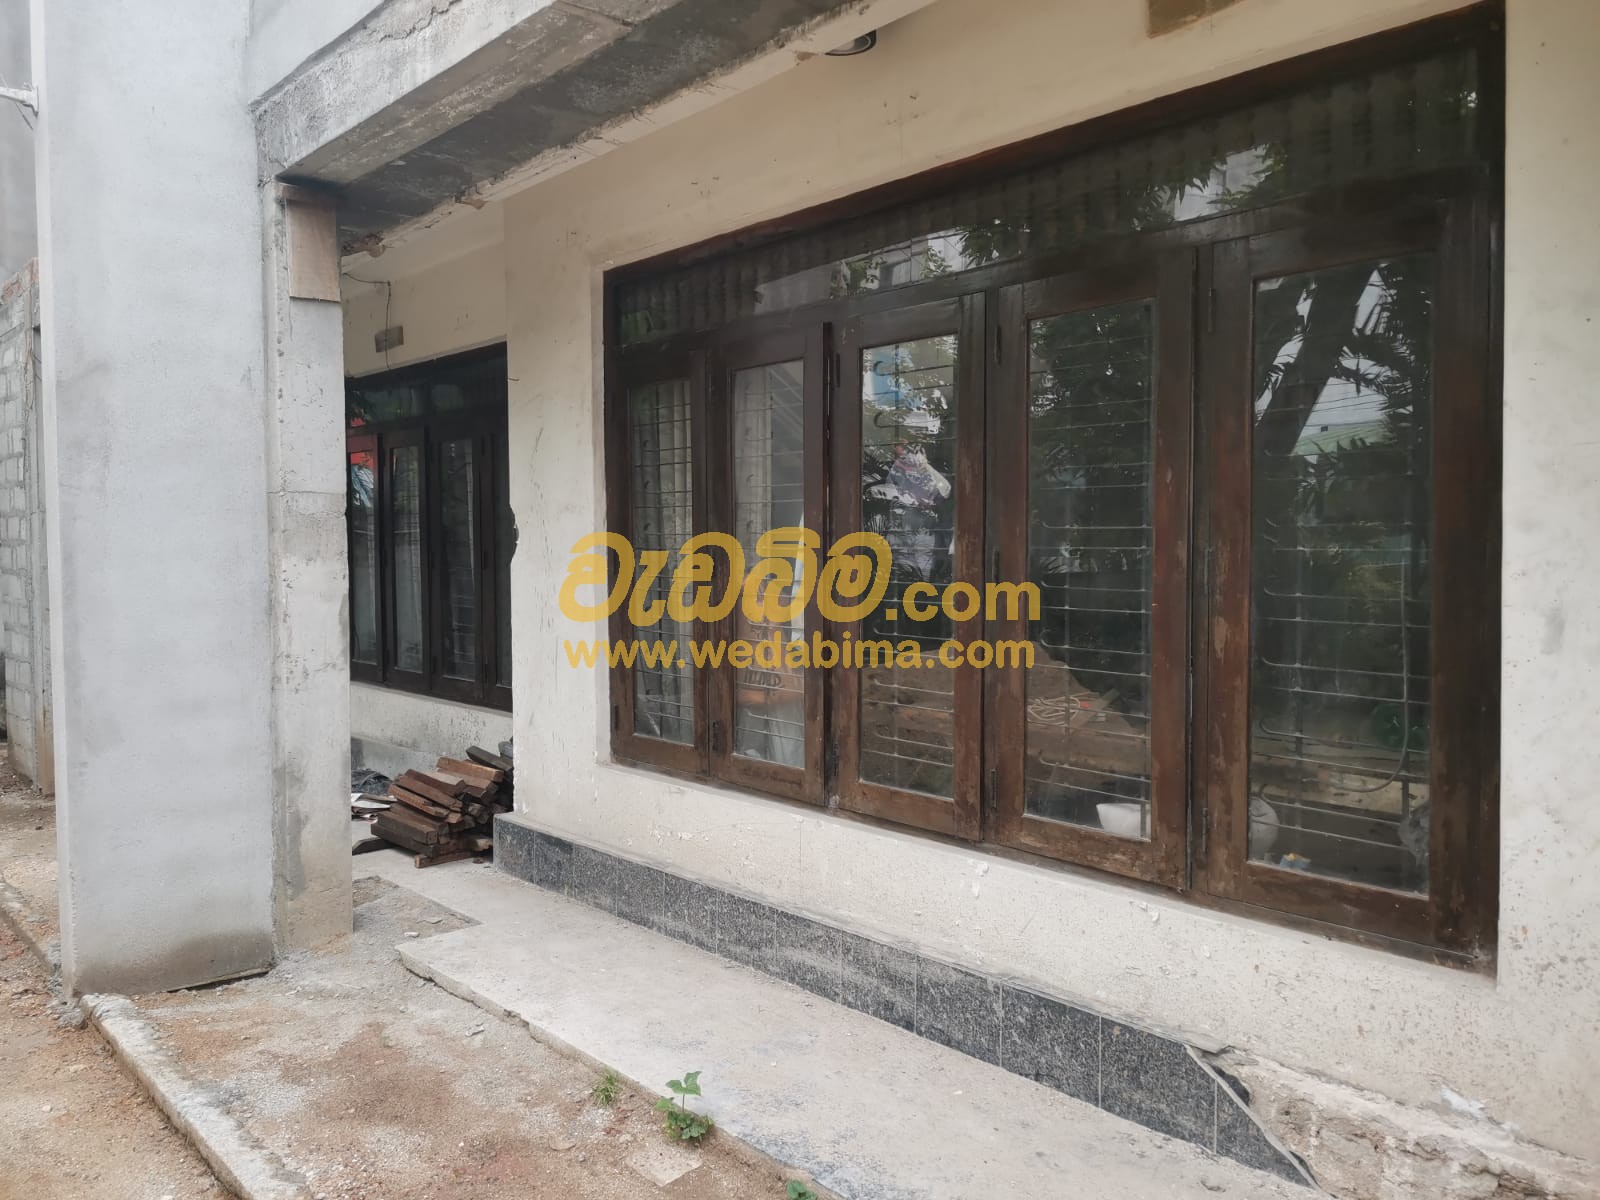 Used Window Frames for Sale